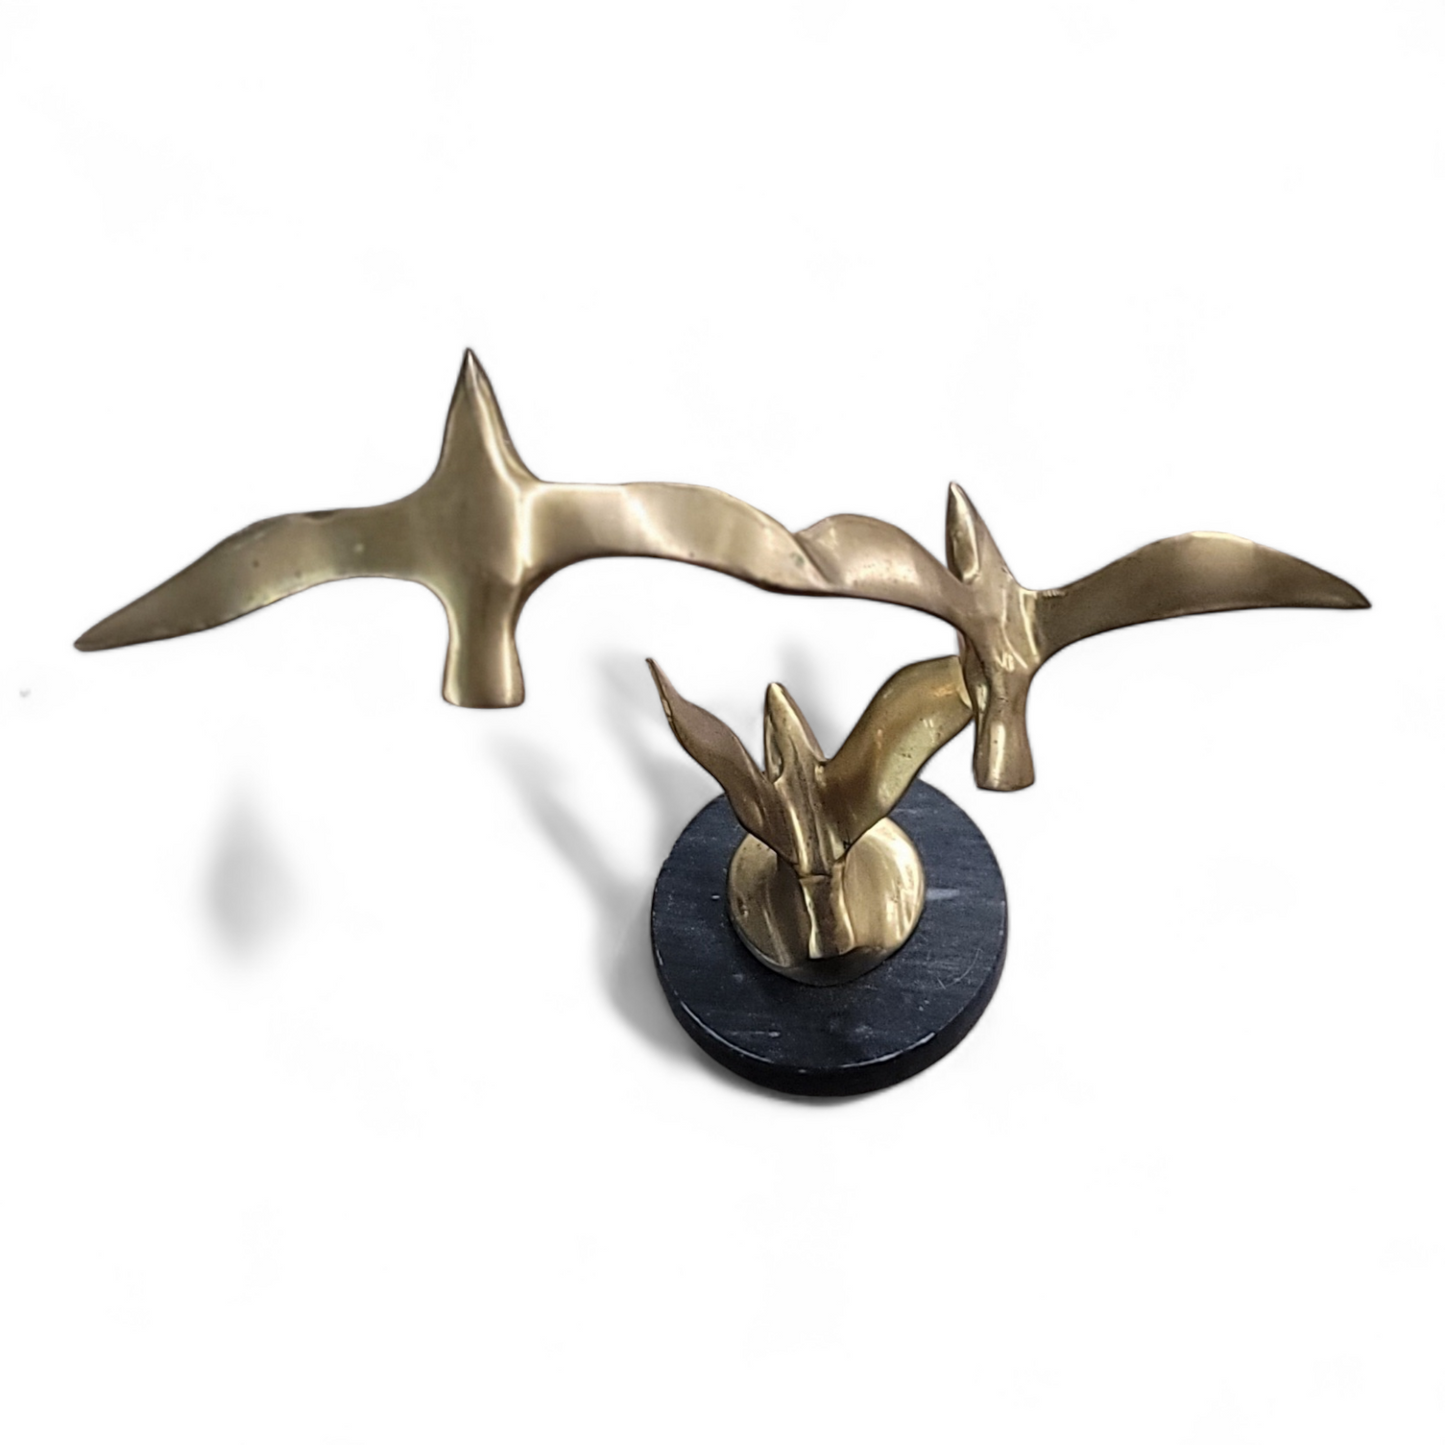 Solid brass flying seagulls stature 9 in MCM vintage